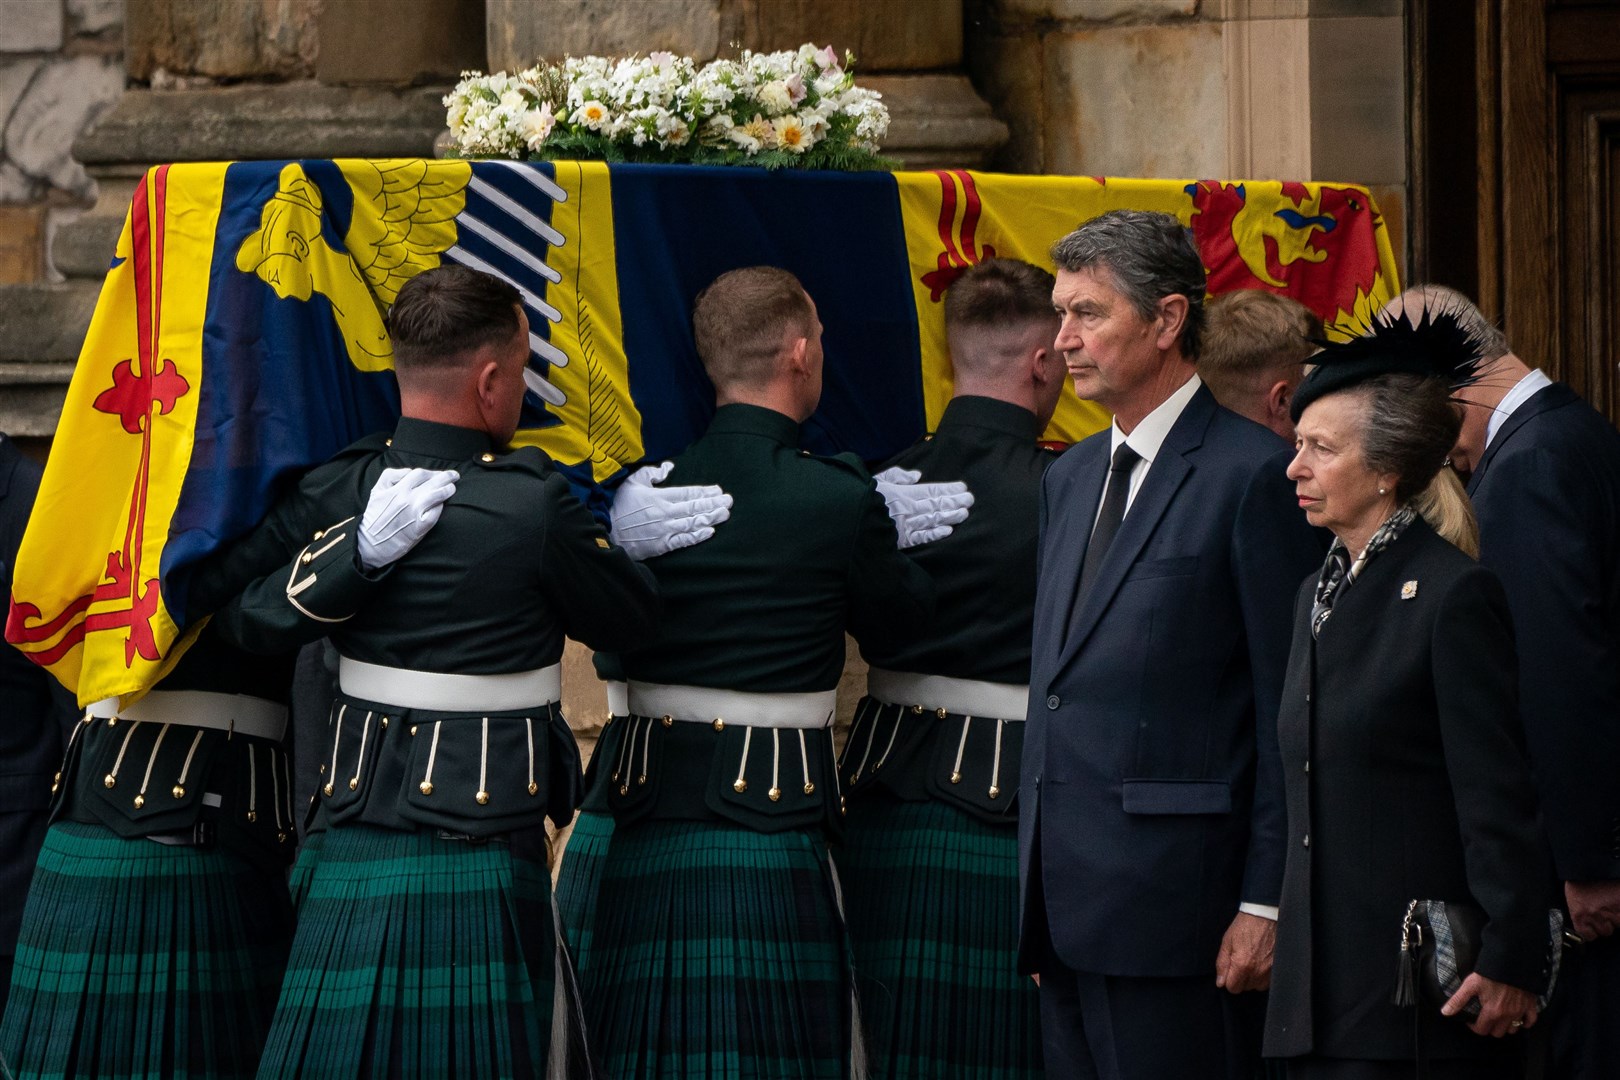 Vice Admiral Timothy Laurence and the Princess Royal stand solemnly as the coffin of Queen Elizabeth II, is carried into the Palace of Holyroodhouse (Aaron Chown/PA)